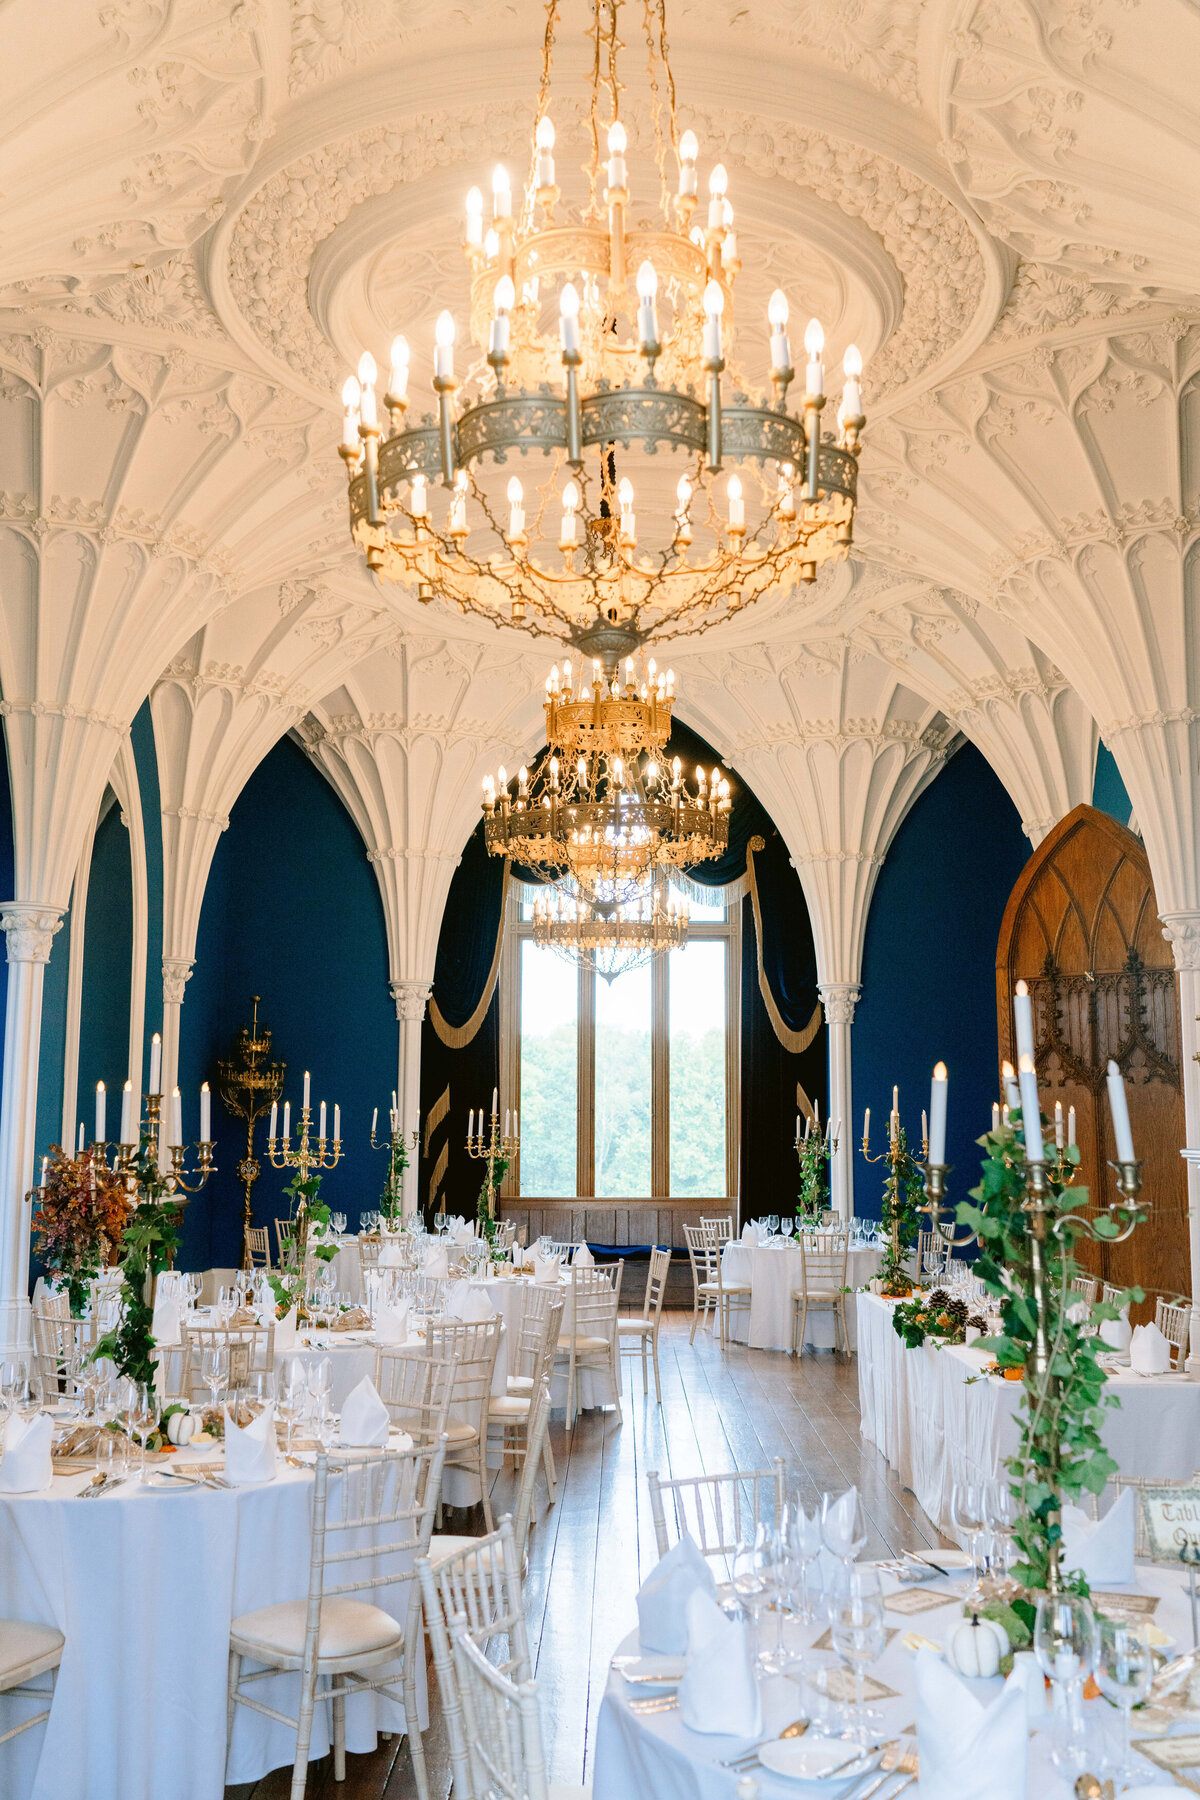 the allerton castle ballroom laid out for a wedding breakfast. a gothic room